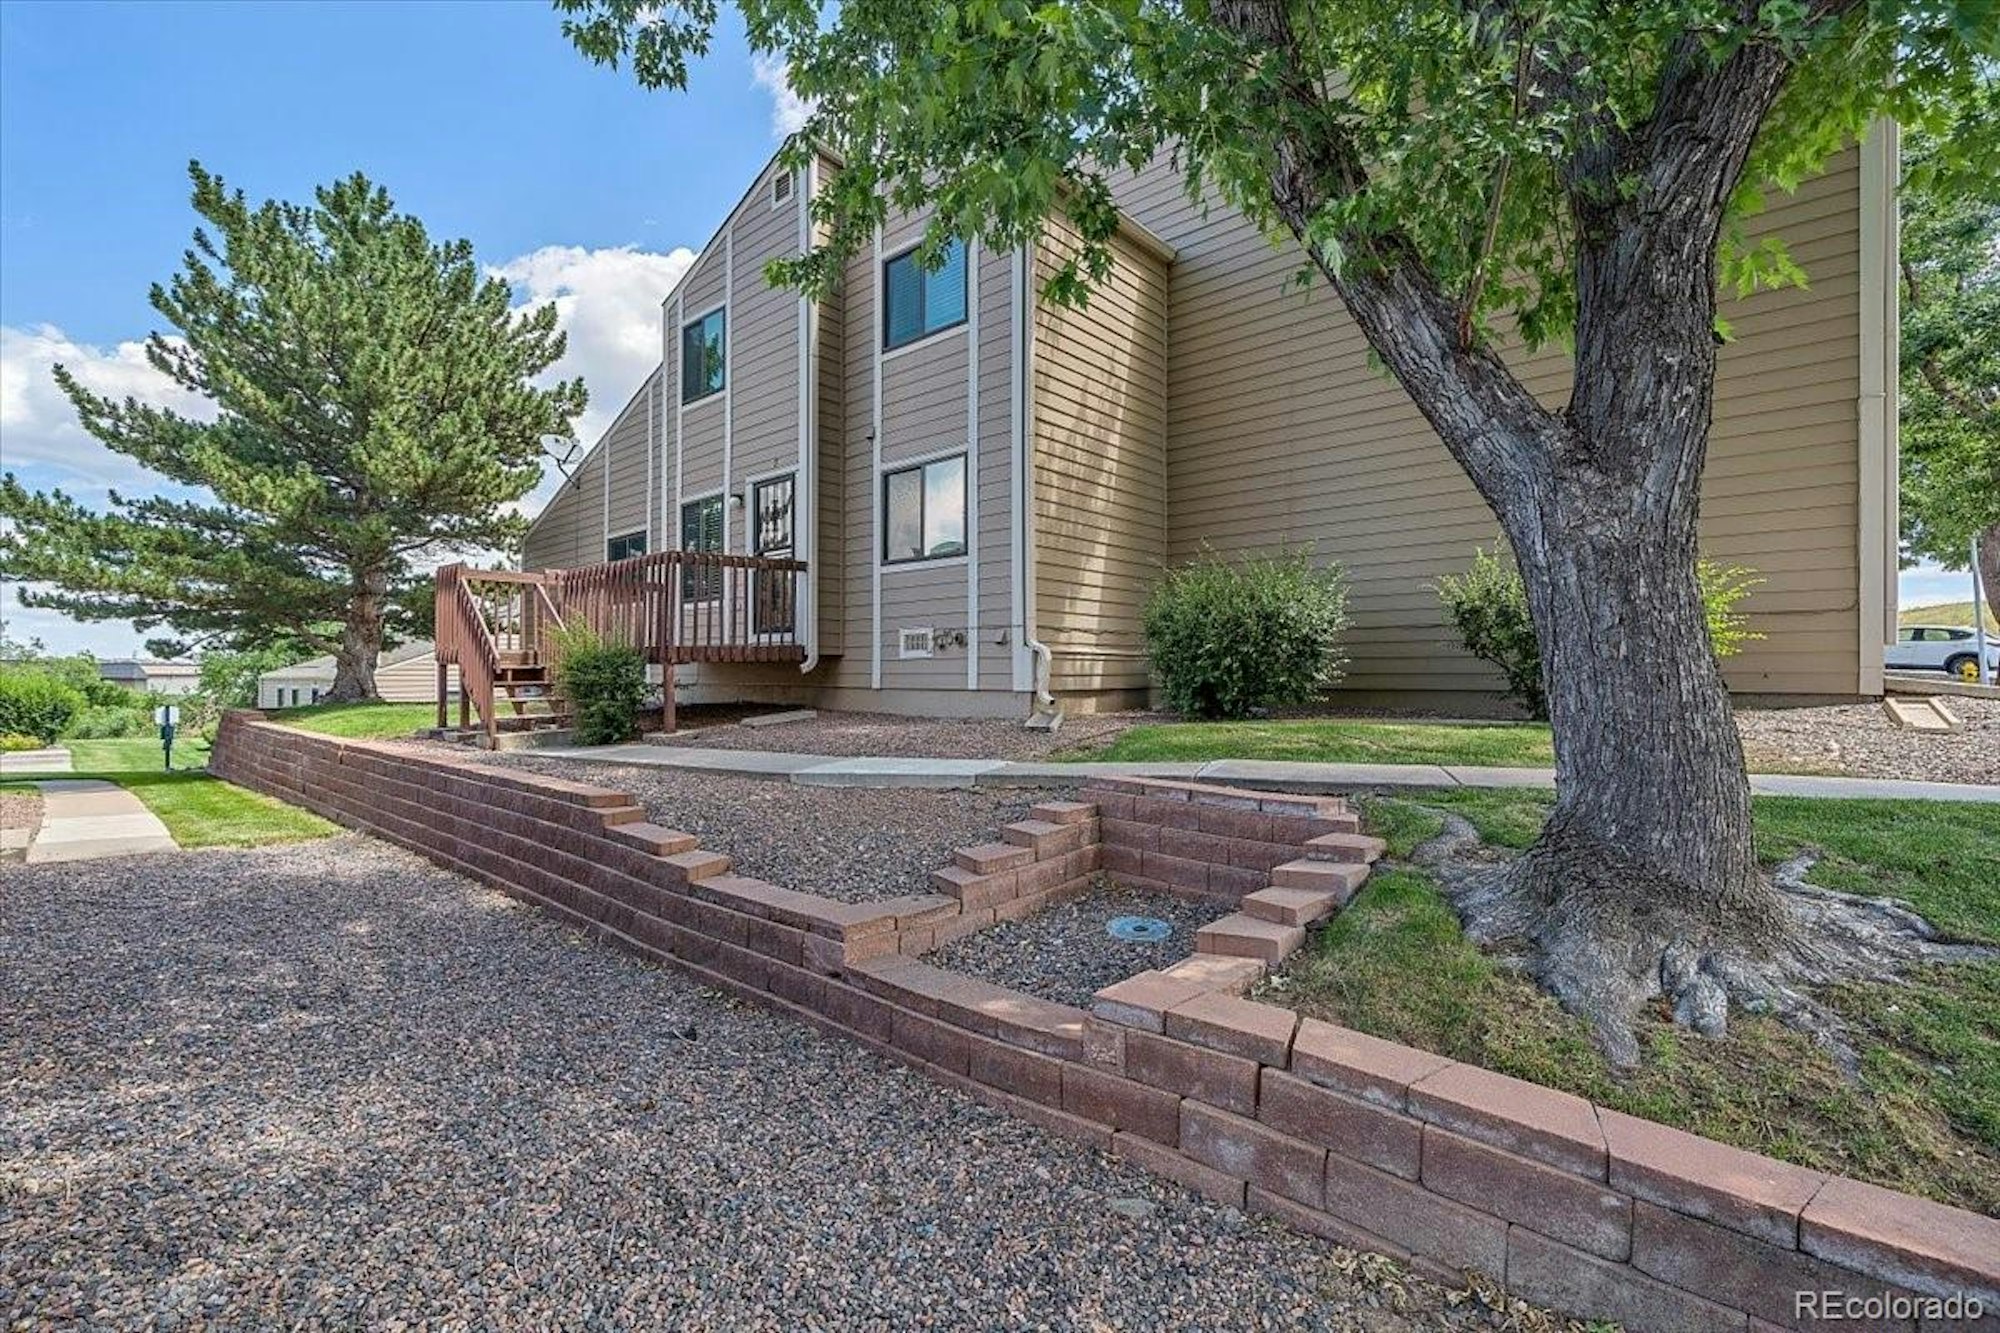 Photo 1 of 18 - 18268 W 58th Pl #27, Golden, CO 80403